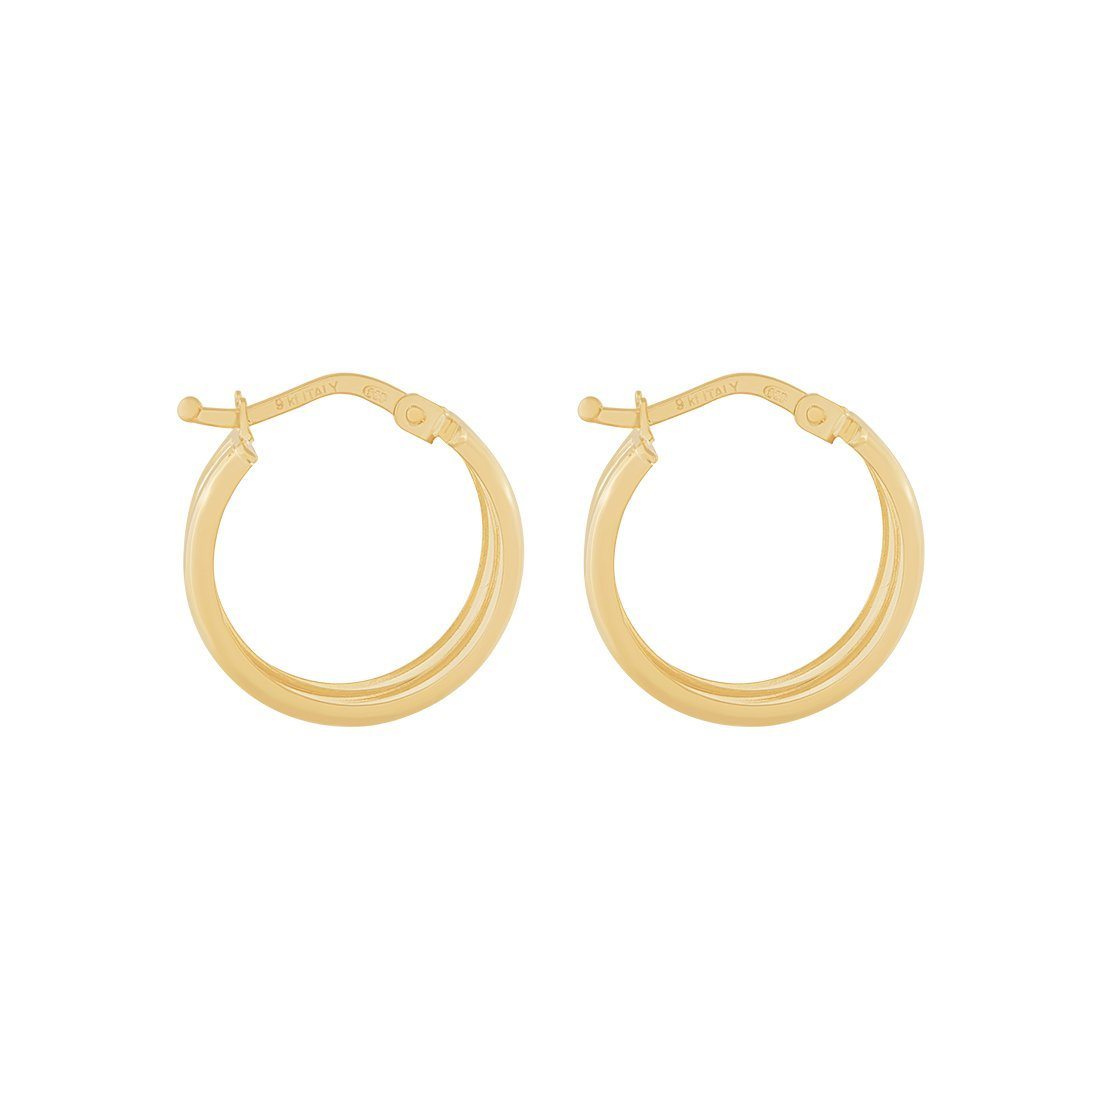 Double Round Hoop Earrings 20mm in 9ct Yellow Gold Silver Infusion Earrings Bevilles 